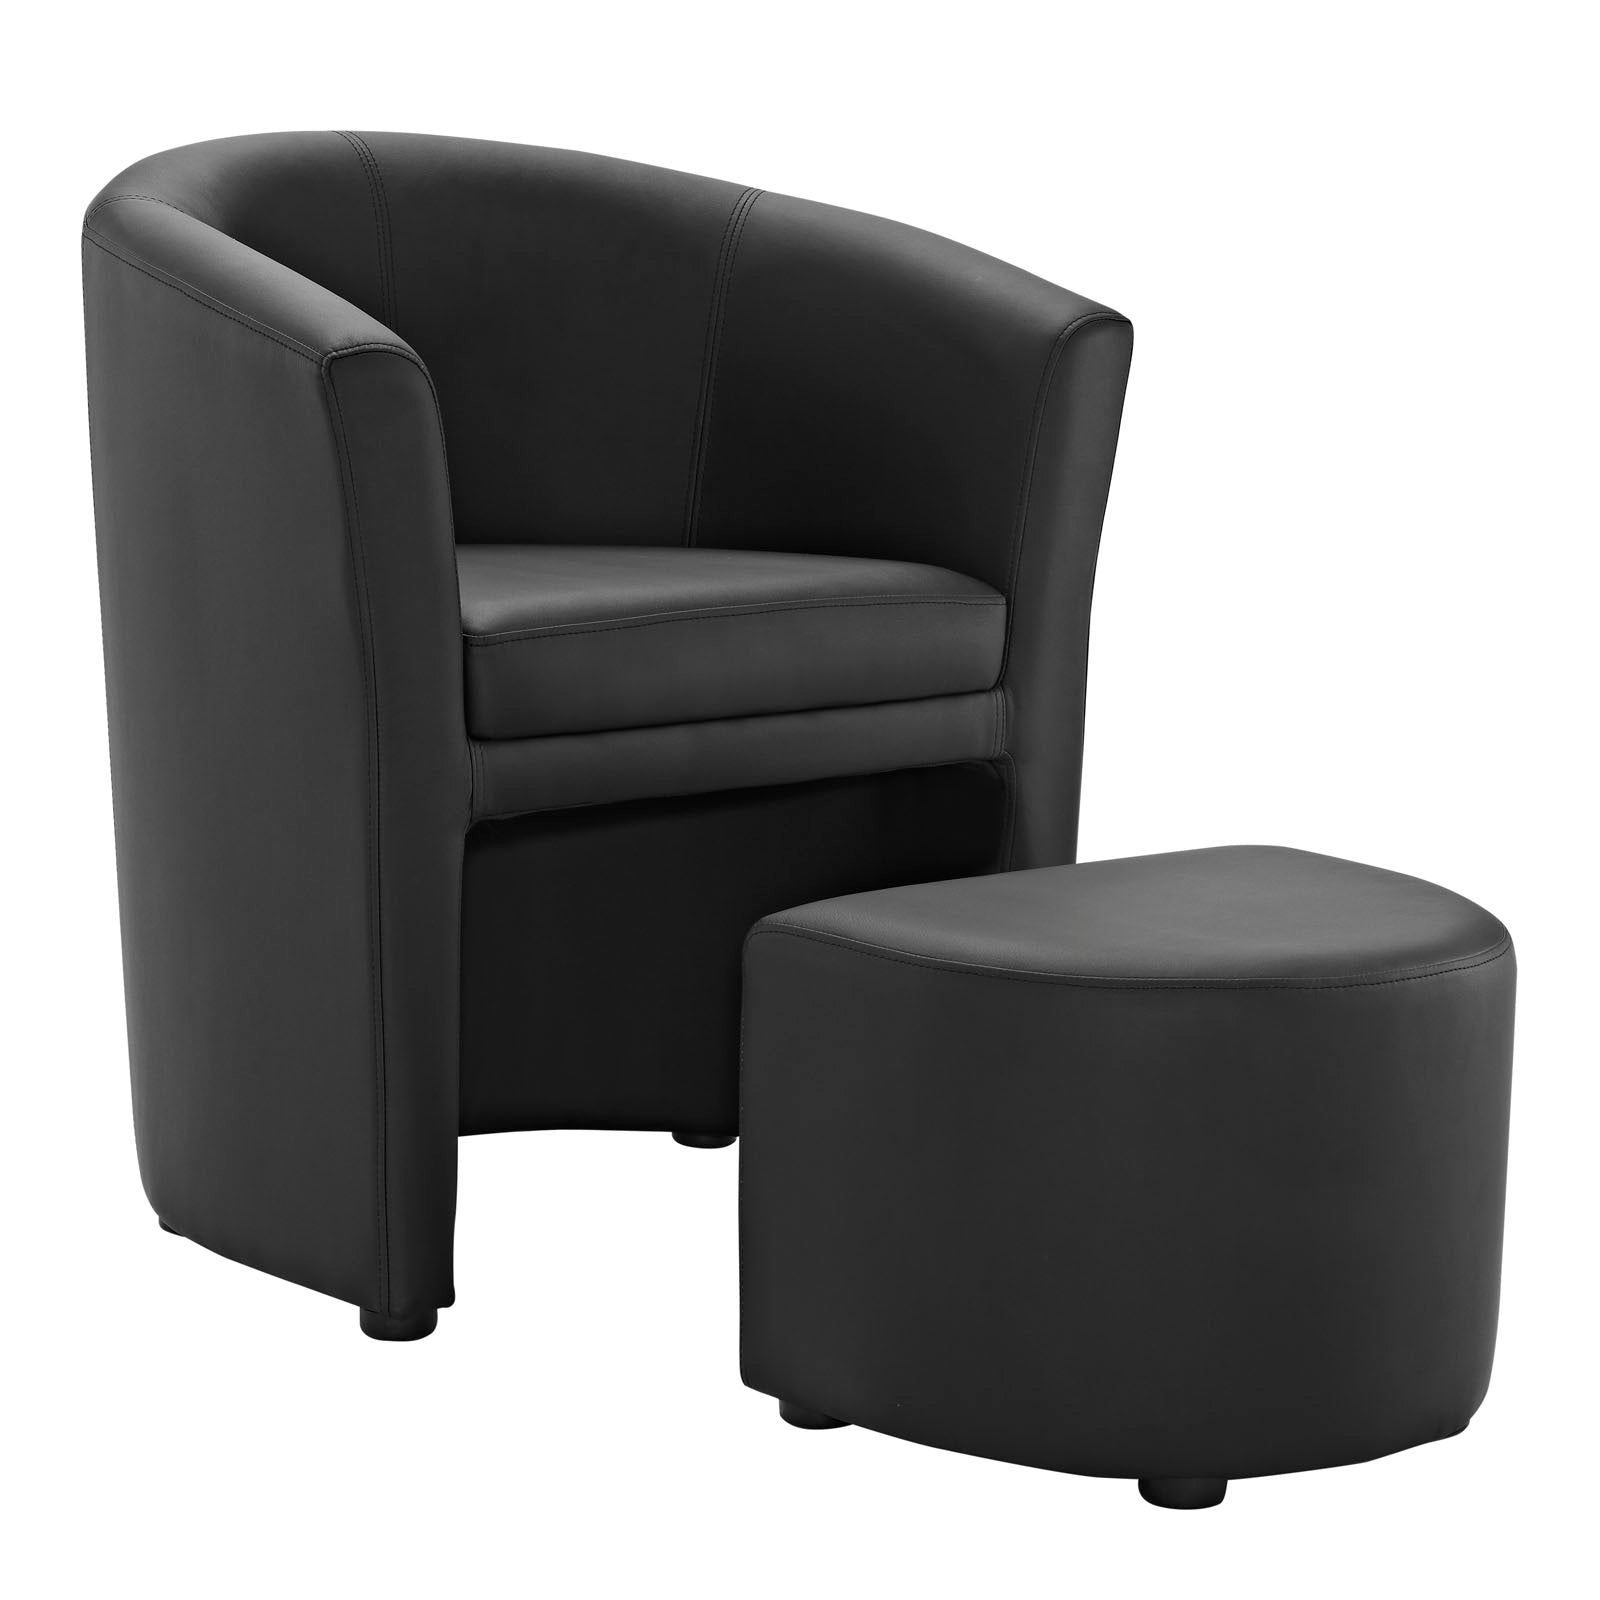 Divulge Faux Leather Armchair And Ottoman Set - Reclining Accent Chair - Back Support